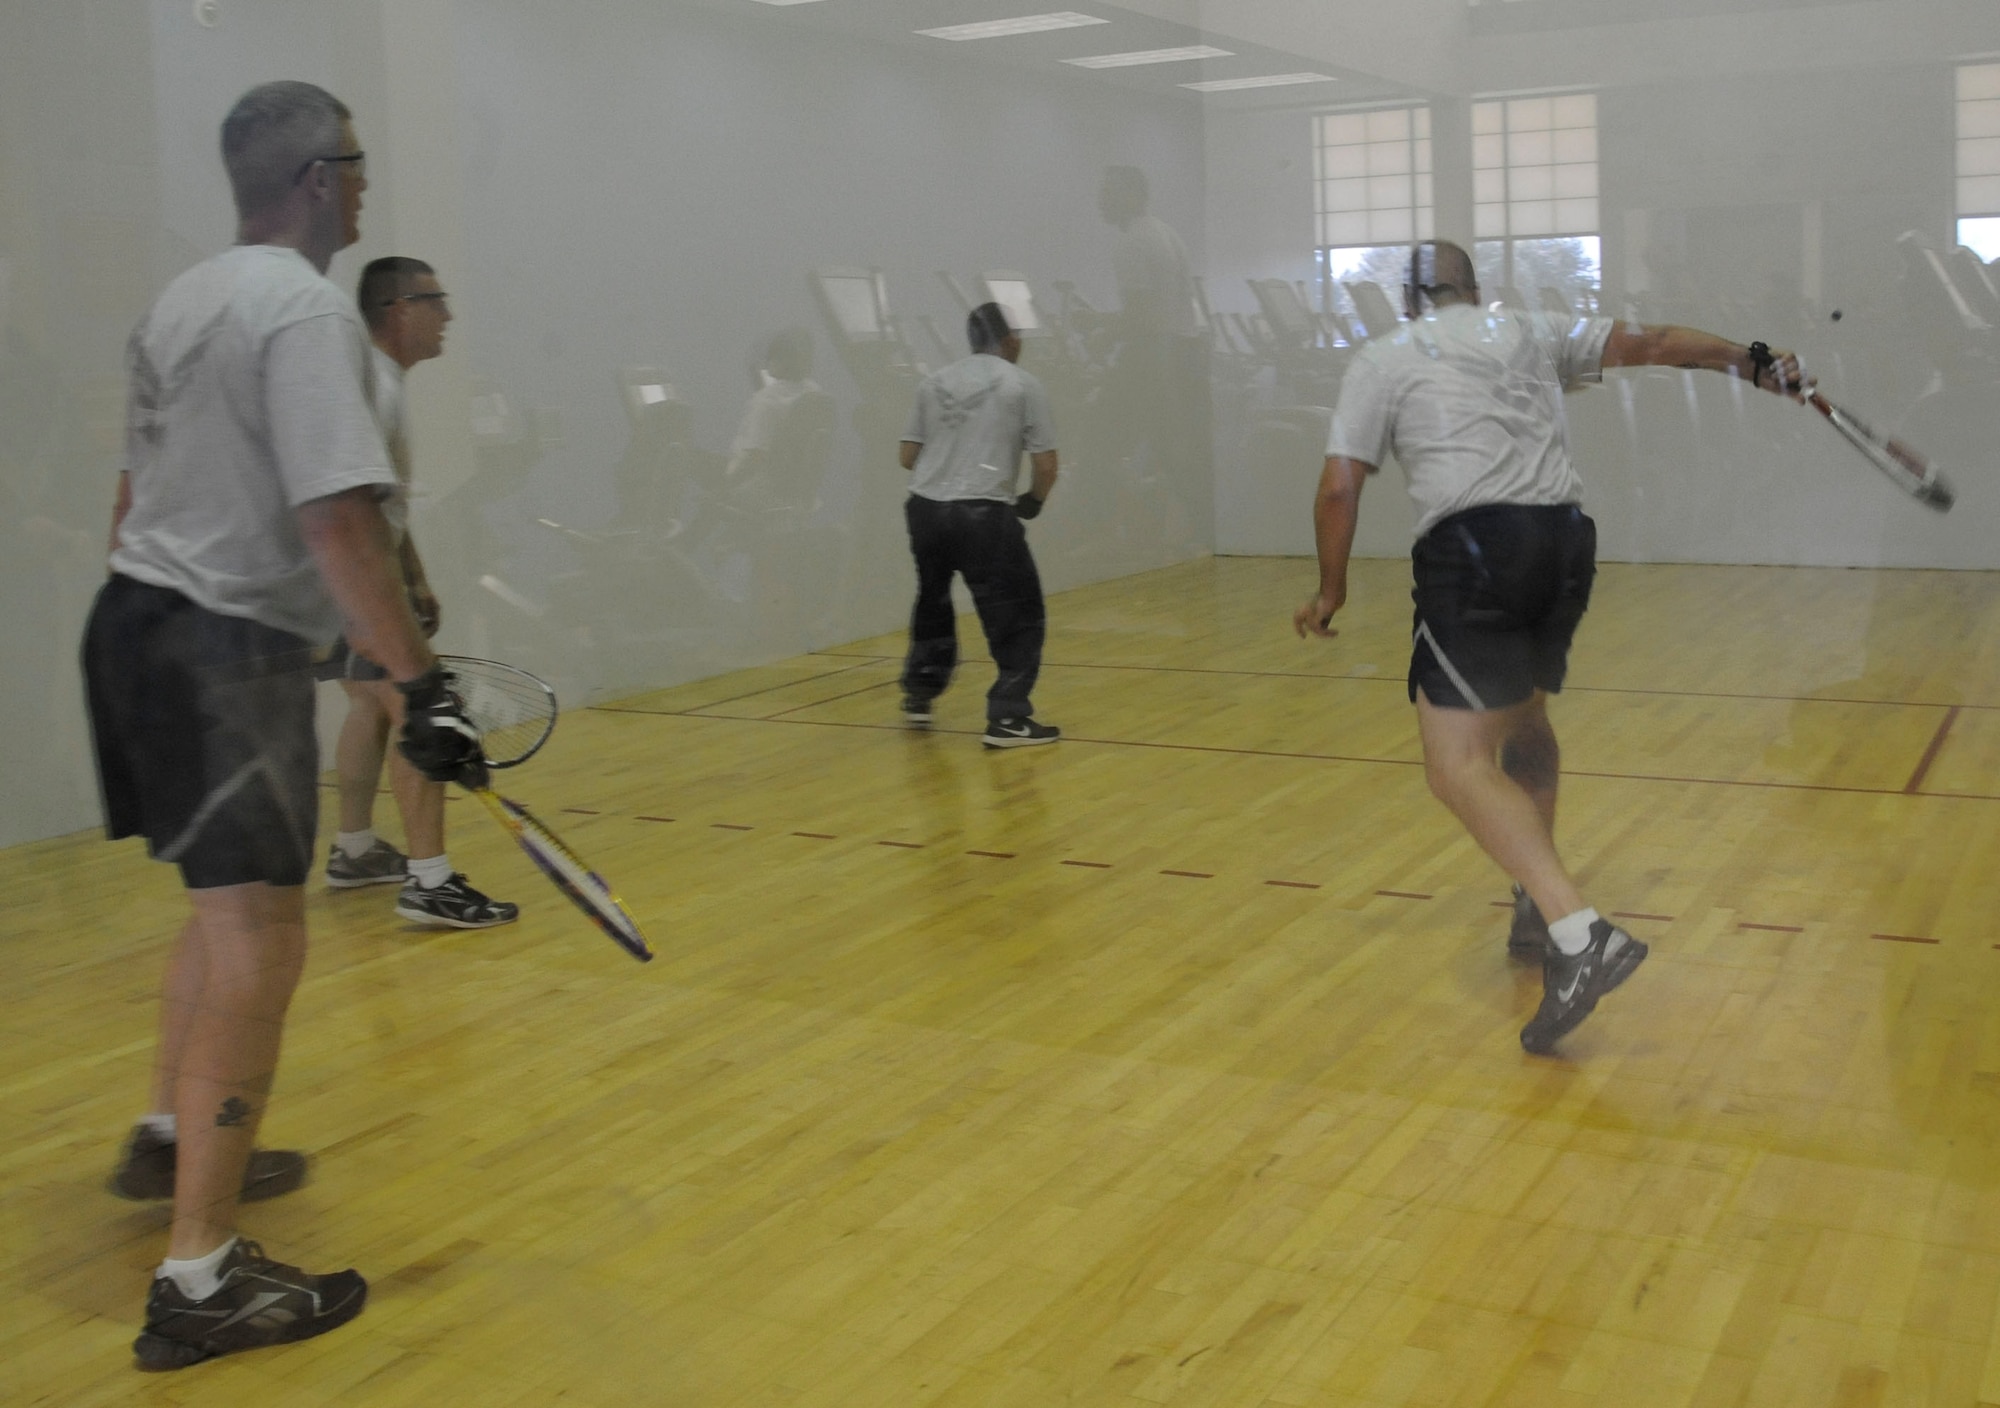 Barksdale Airmen play a game of racquetball during the 2012 Sports Day on Barksdale Air Force Base, La., Nov. 16. Airmen participated in activities such as dodgeball, soccer, basketball, a rucksack relay race, volleyball, flag football and a homerun derby. Sports Day served as a way to promote the importance of fitness and build camaraderie. (U.S. Air Force photo/Airman 1st Class Andrew Moua)(RELEASED)